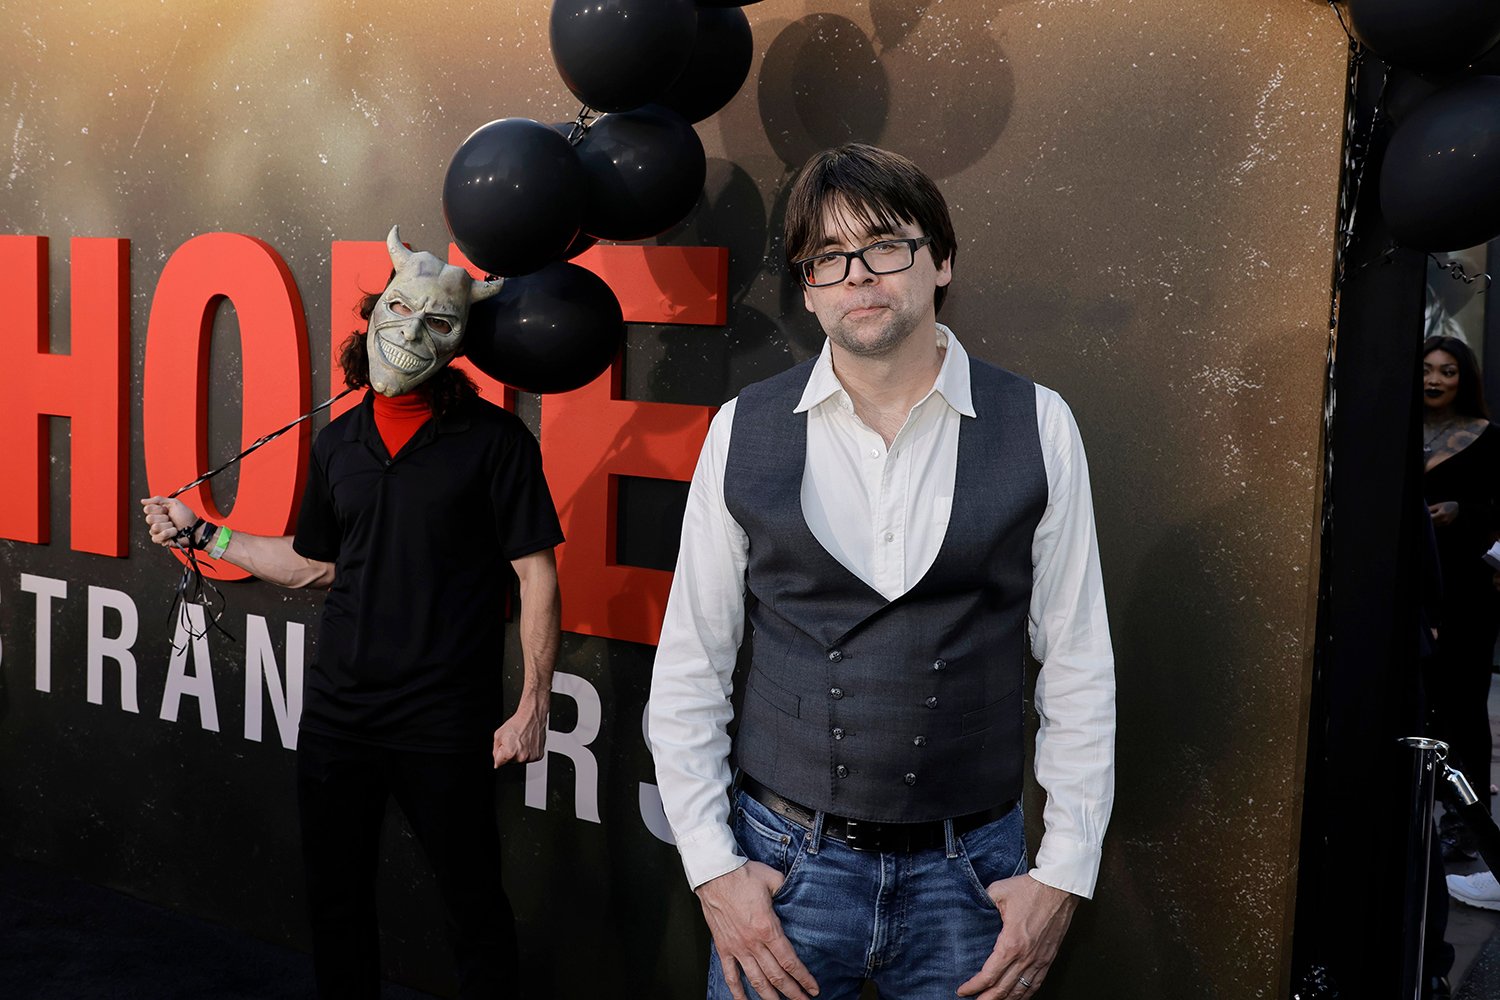 Joe Hill attends the premiere of The Black Phone as The Grabber stands behind him with balloons